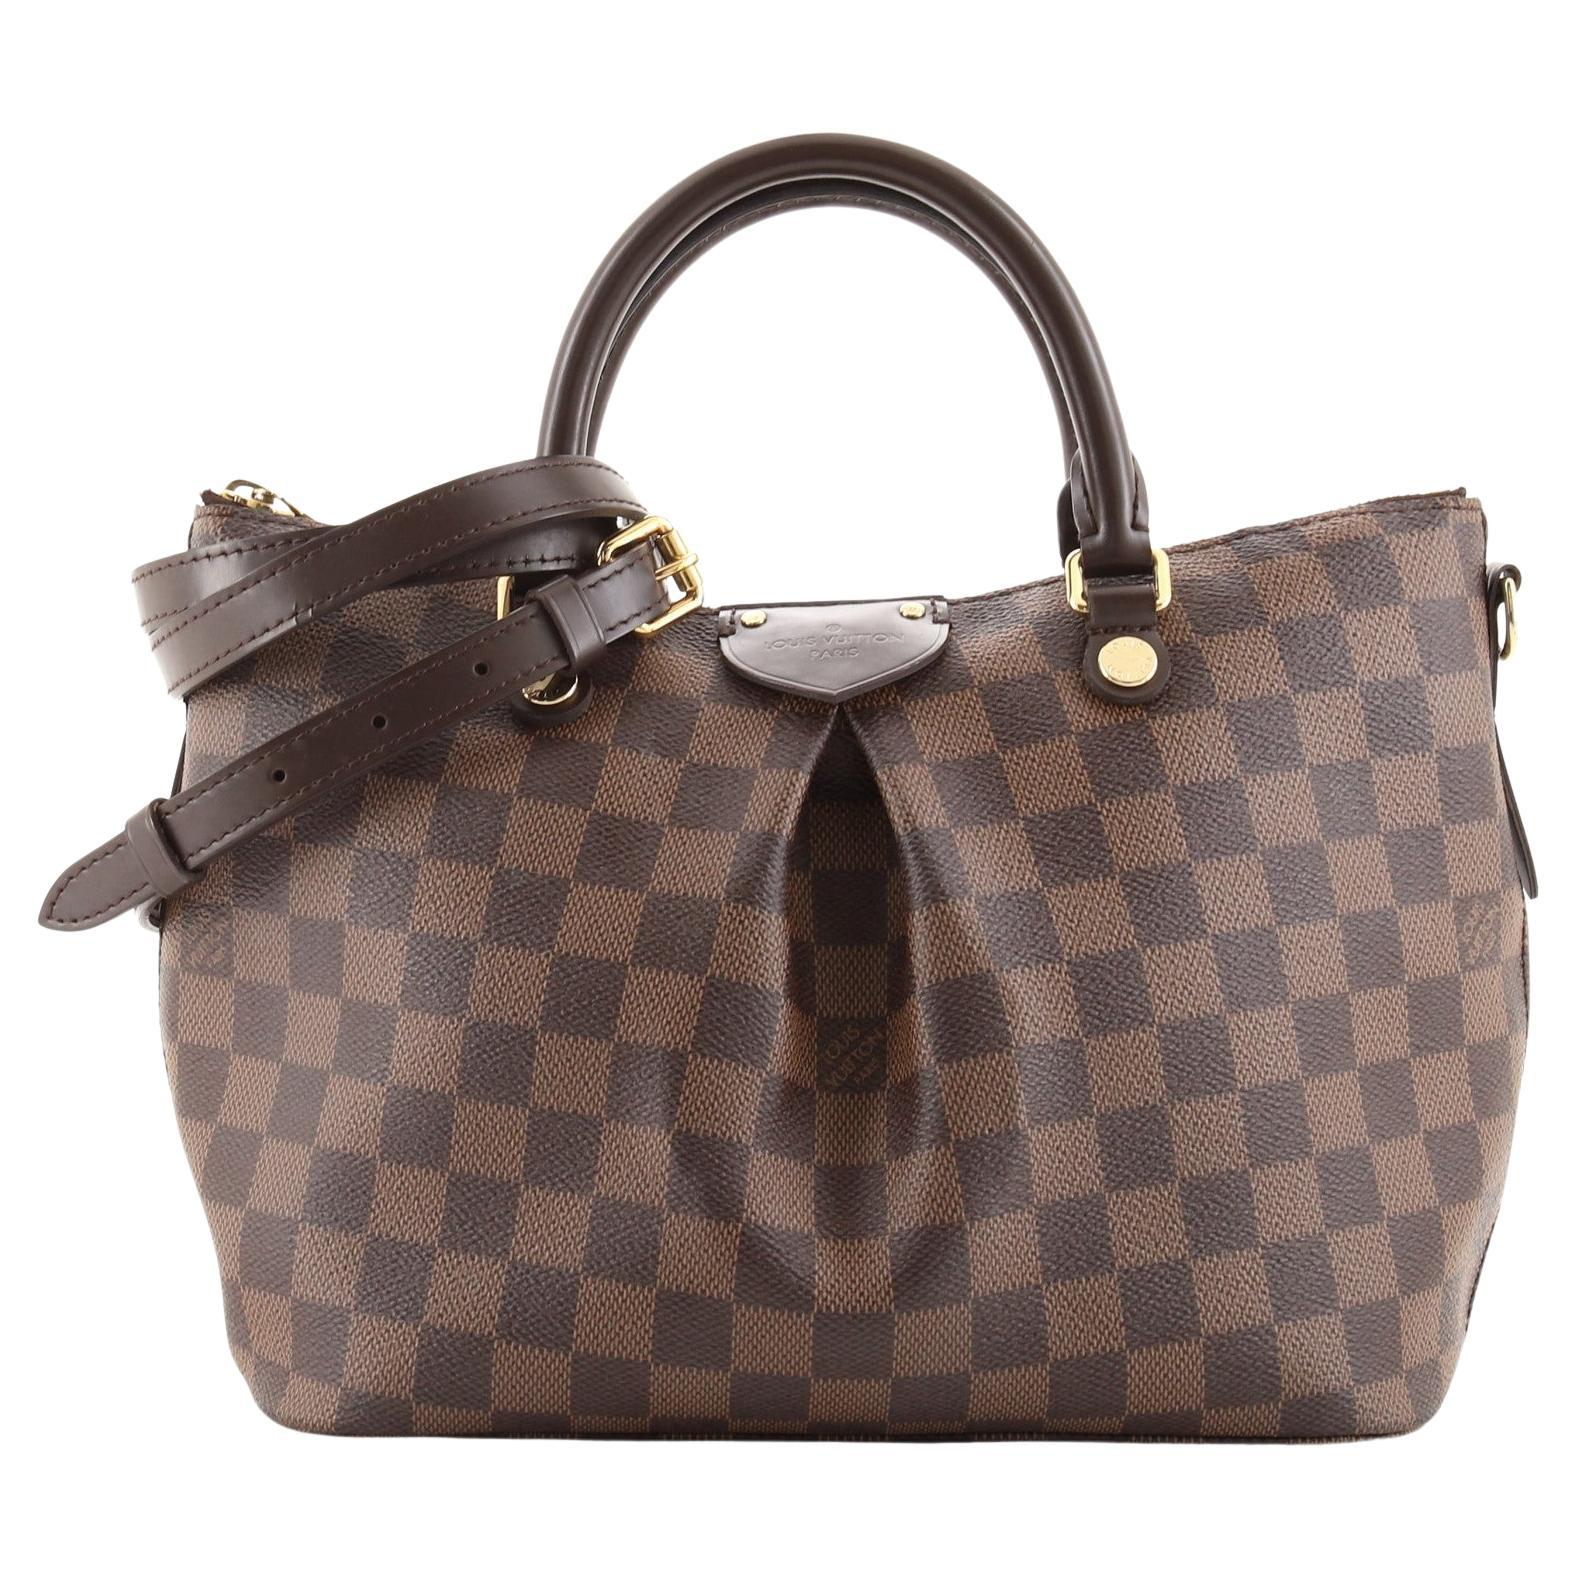 Louis Vuitton Siena - Any info on this bag?, Page 2